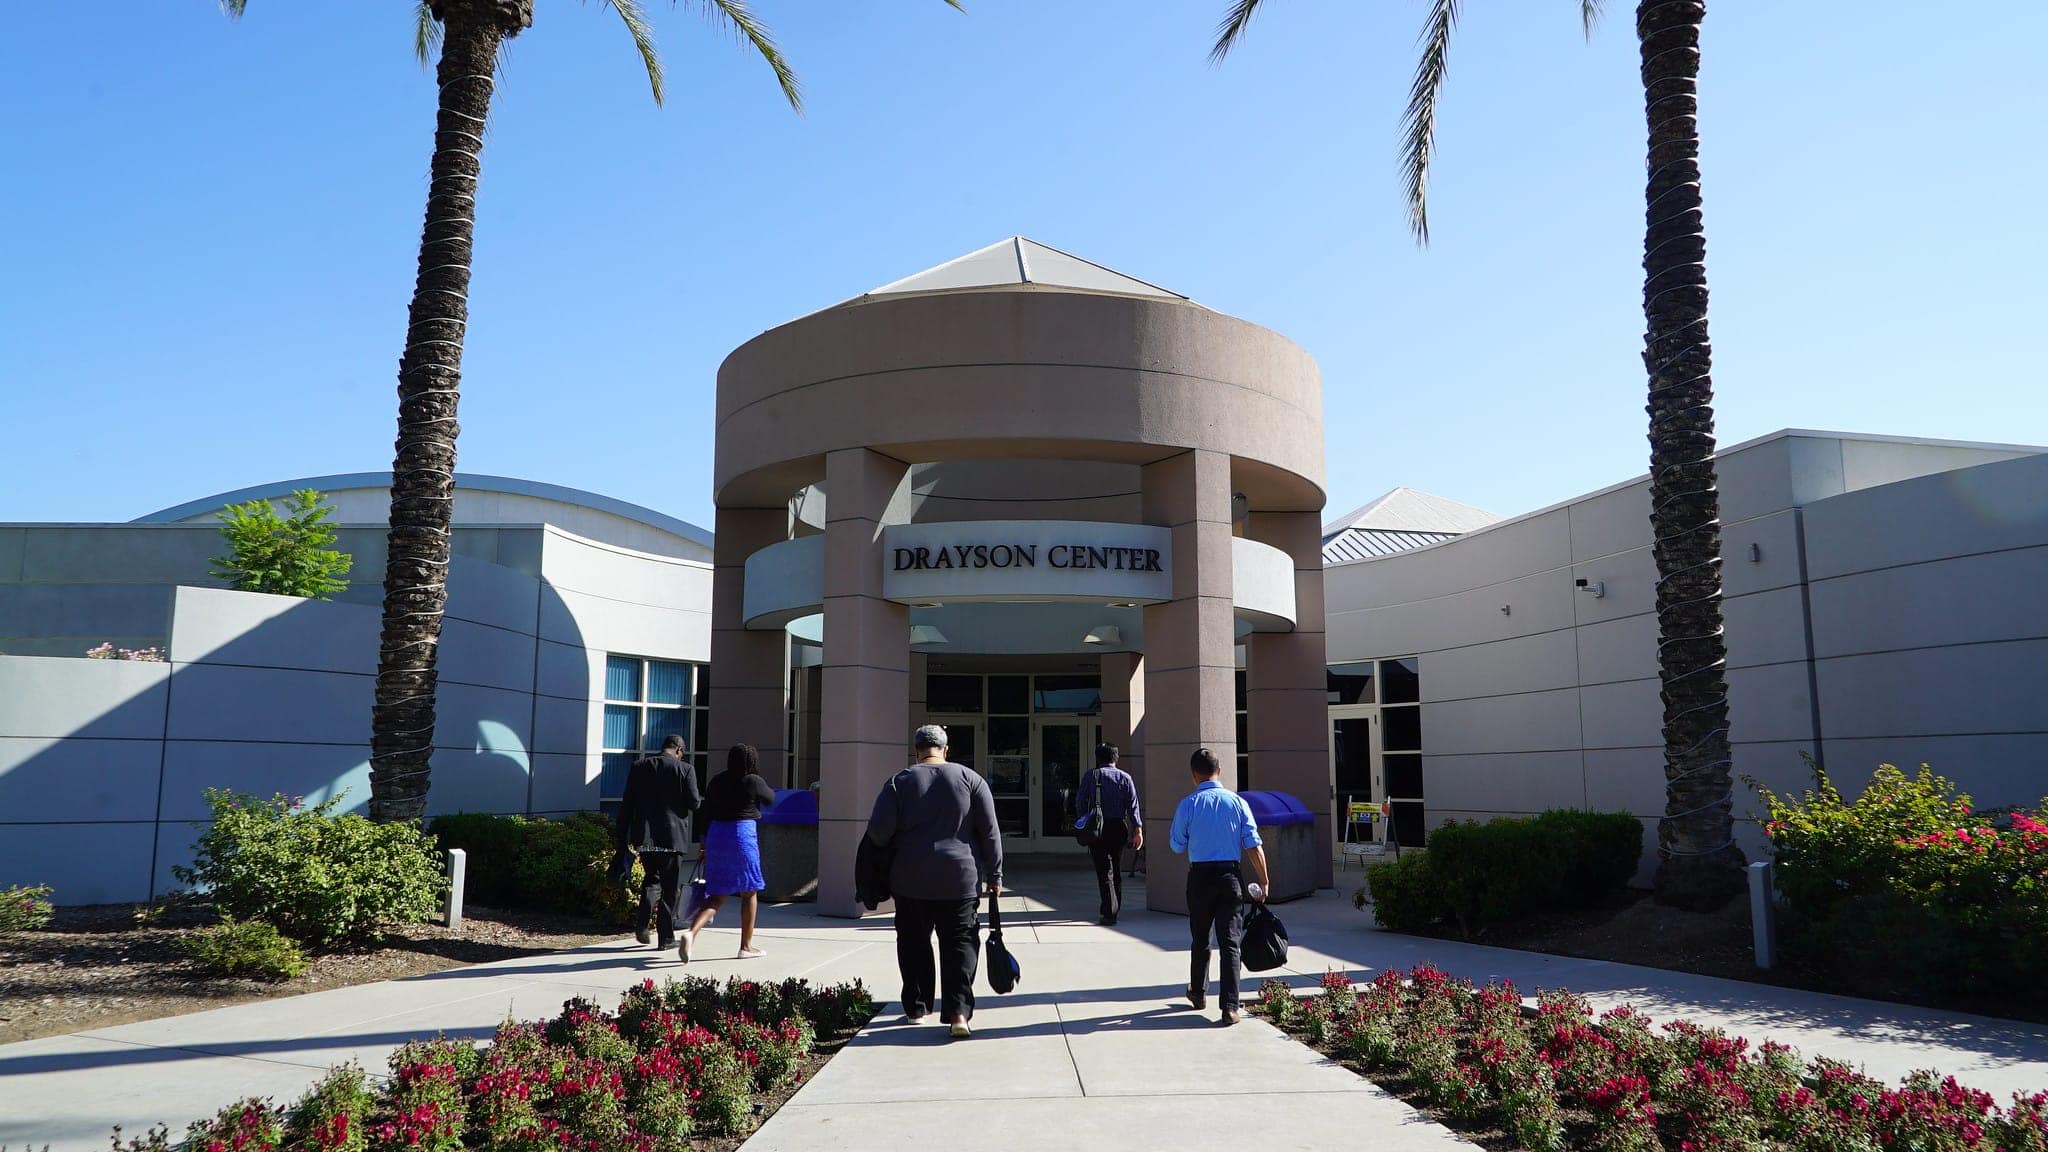 A view of the main entrance to Loma Linda University’s Drayson Center, where most sessions of the 3rd Global Conference on Health and Lifestyle are taking place. The event has gathered more than 800 hundred church leaders, health practitioners, and healthy lifestyle advocates from July 9 to 13, 2019. [Photo: Adventist News Network]